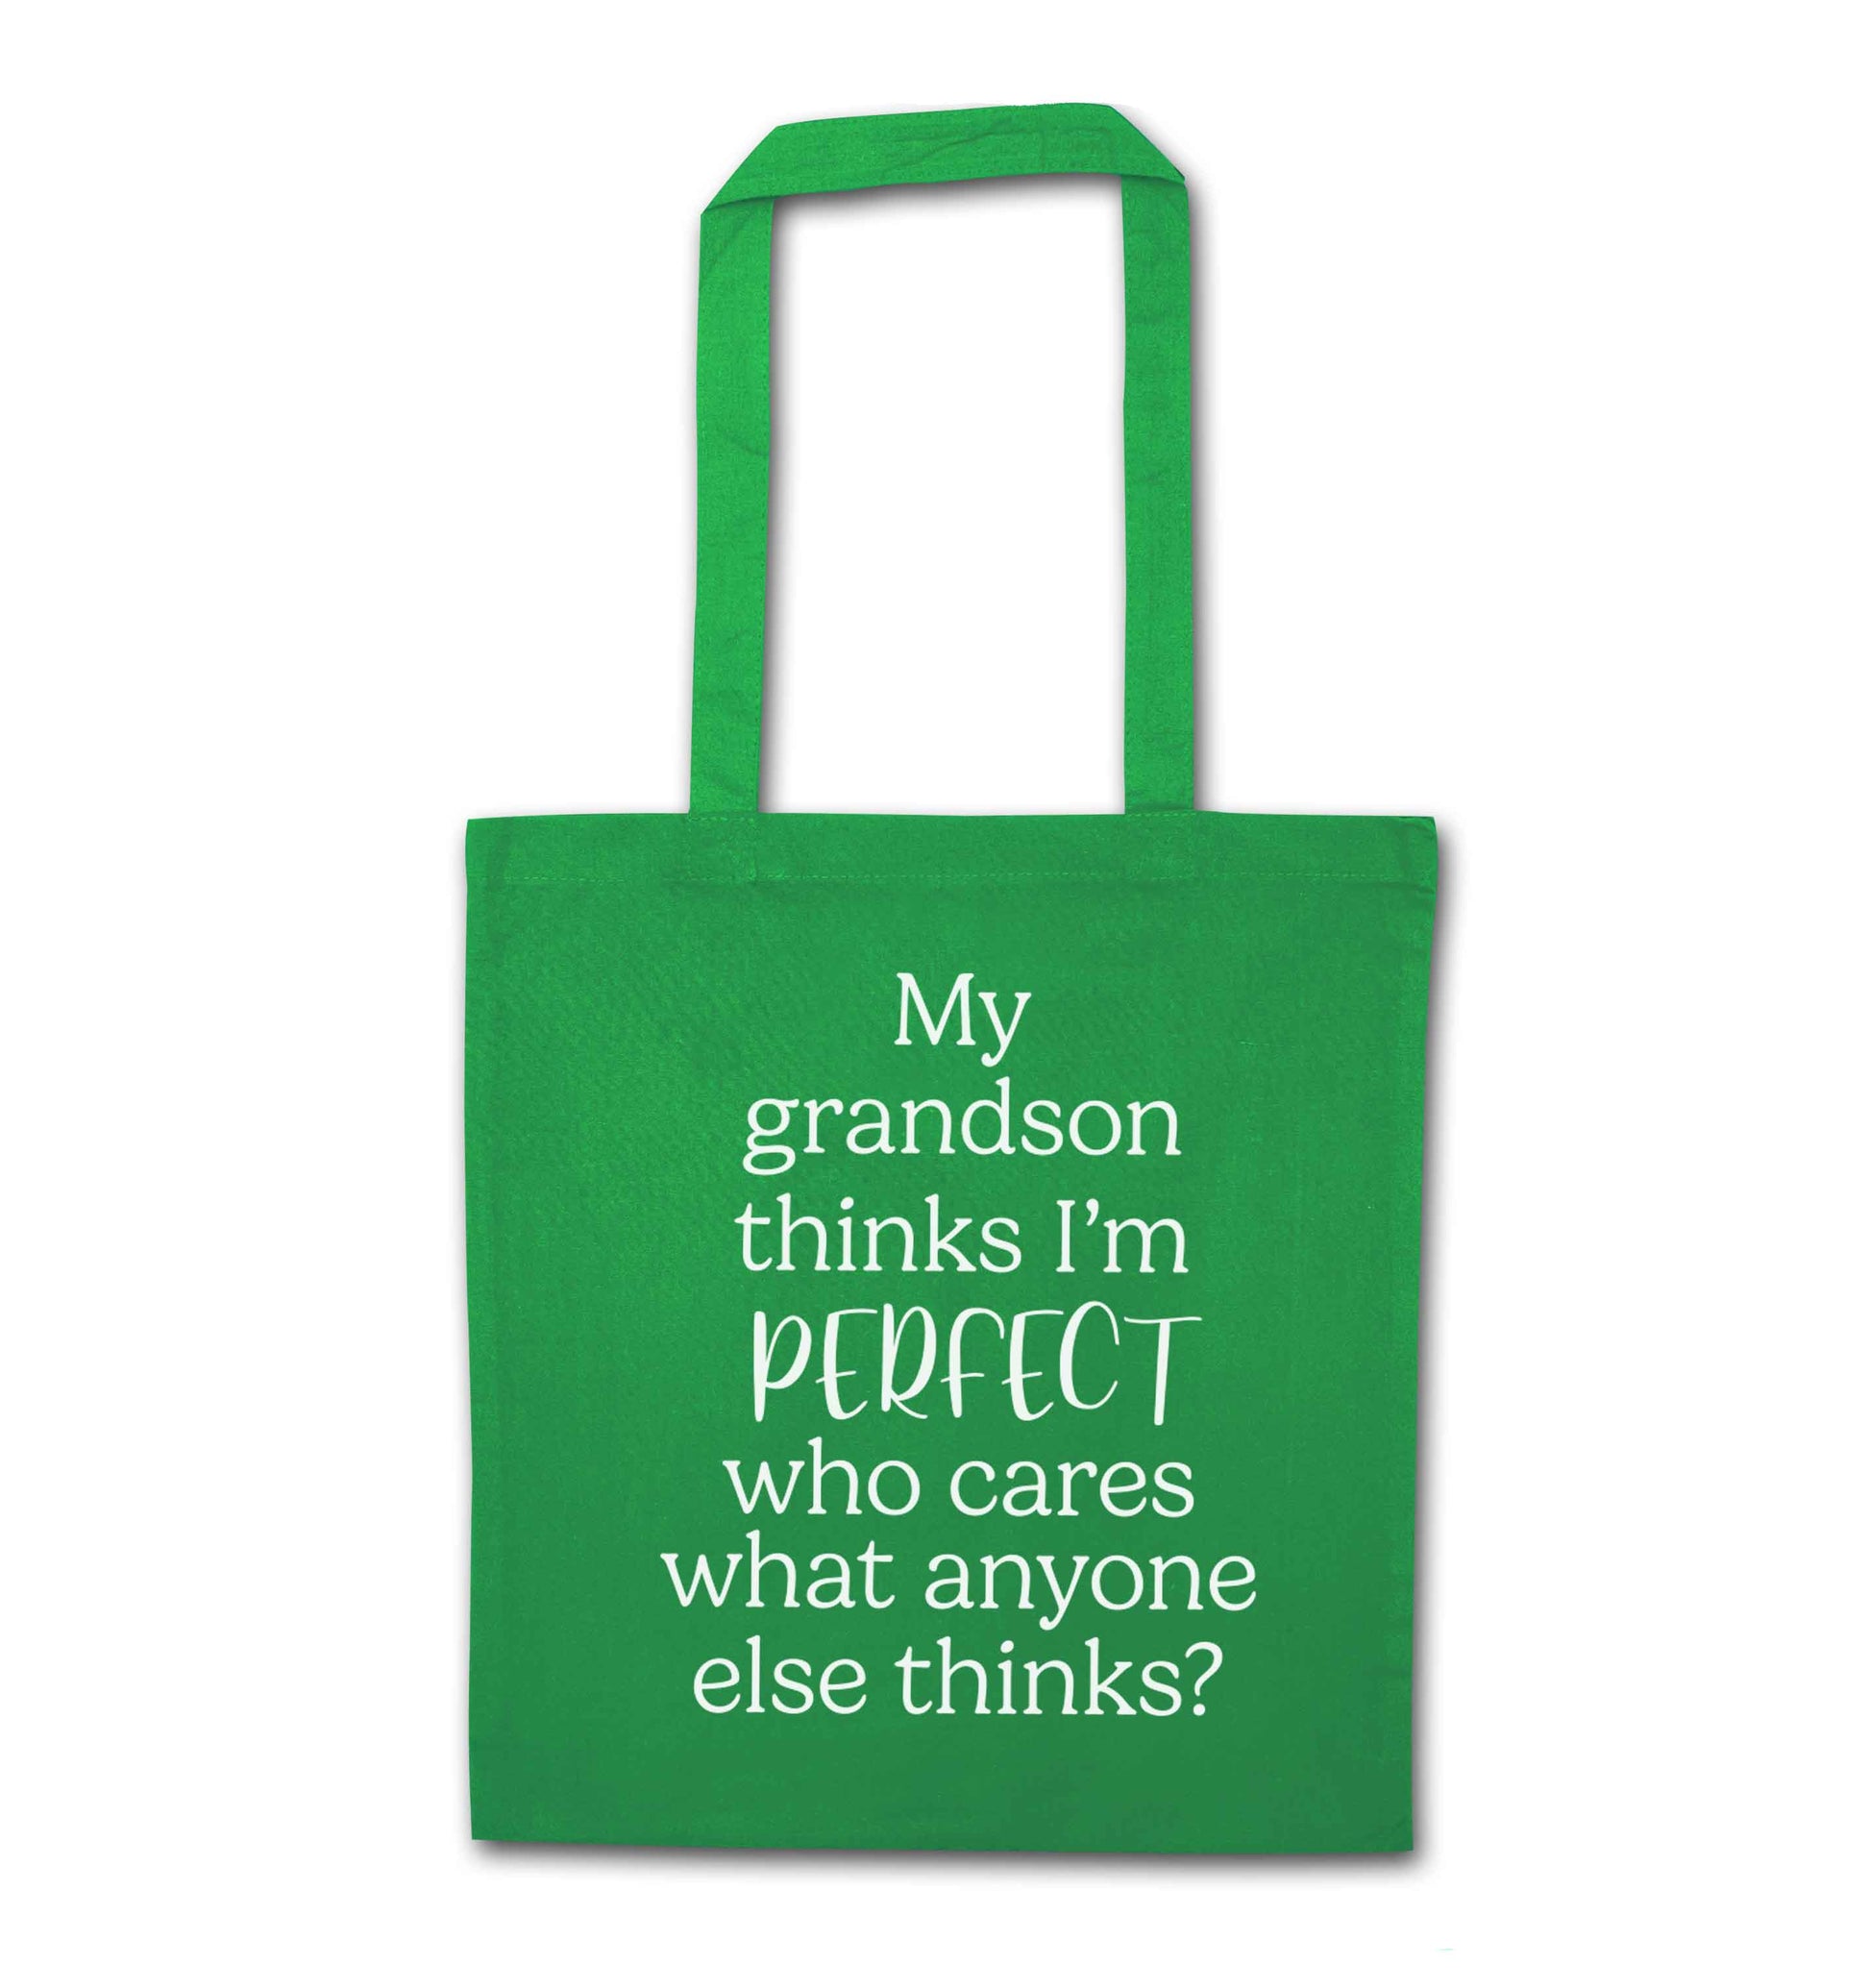 My Grandson thinks I'm perfect who cares what anyone else thinks? green tote bag